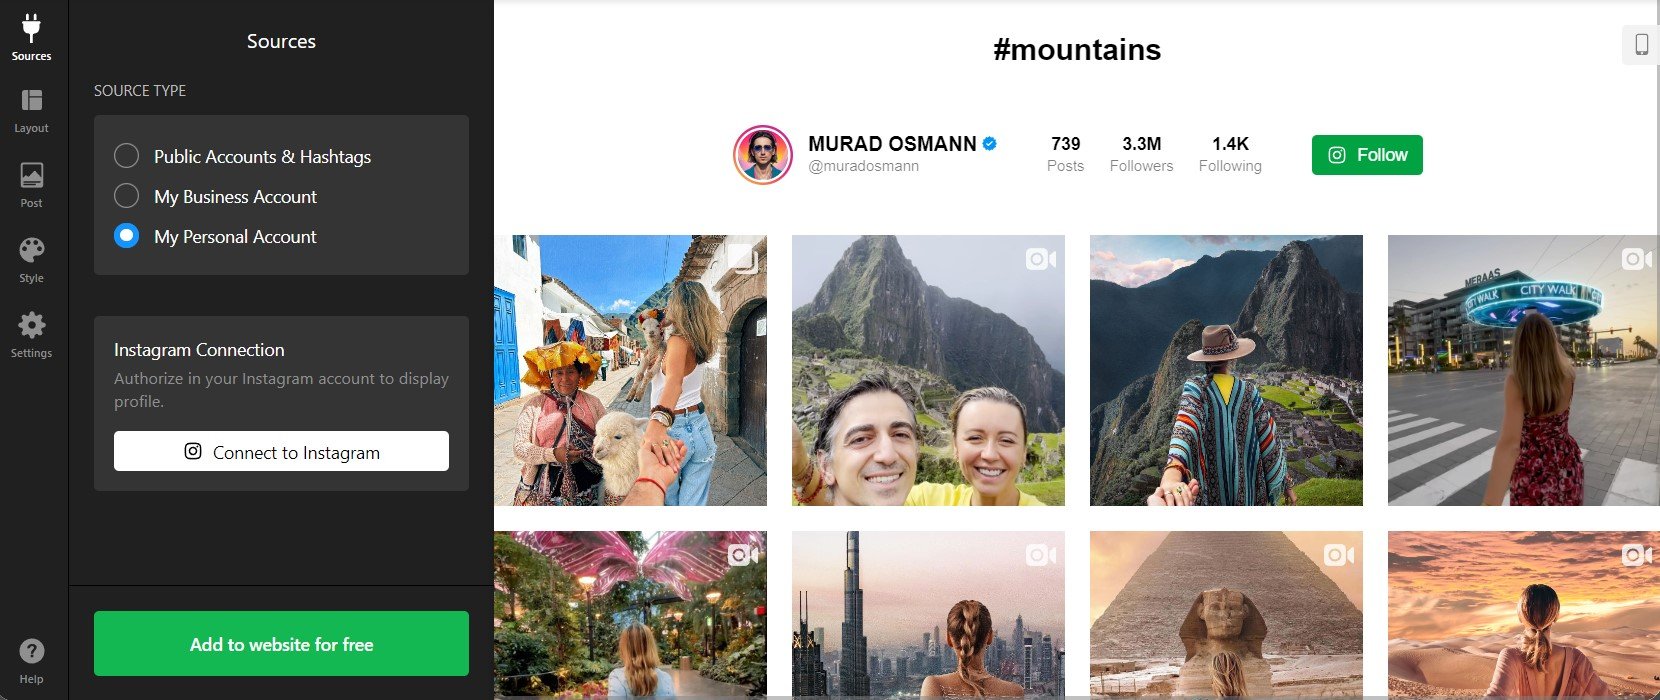 Embed Instagram Feed: connect to Instagram